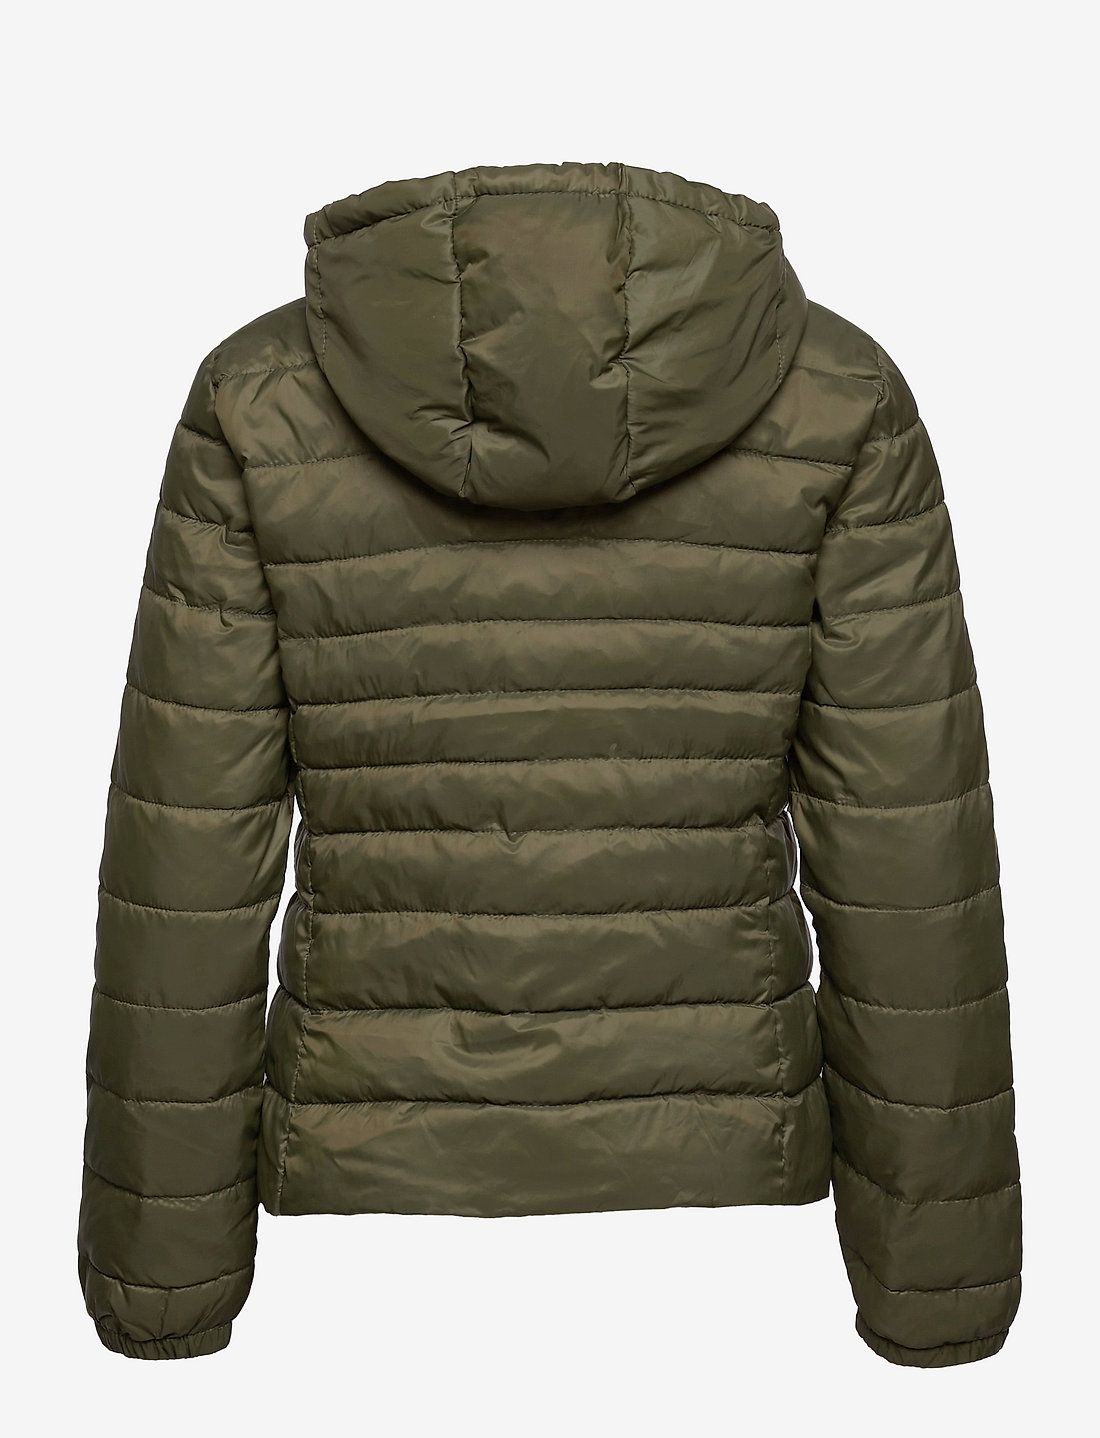 ONLY Onltahoe Hood Jacket Otw - 25.00 €. Buy Down- & padded jackets from  ONLY online at Boozt.com. Fast delivery and easy returns